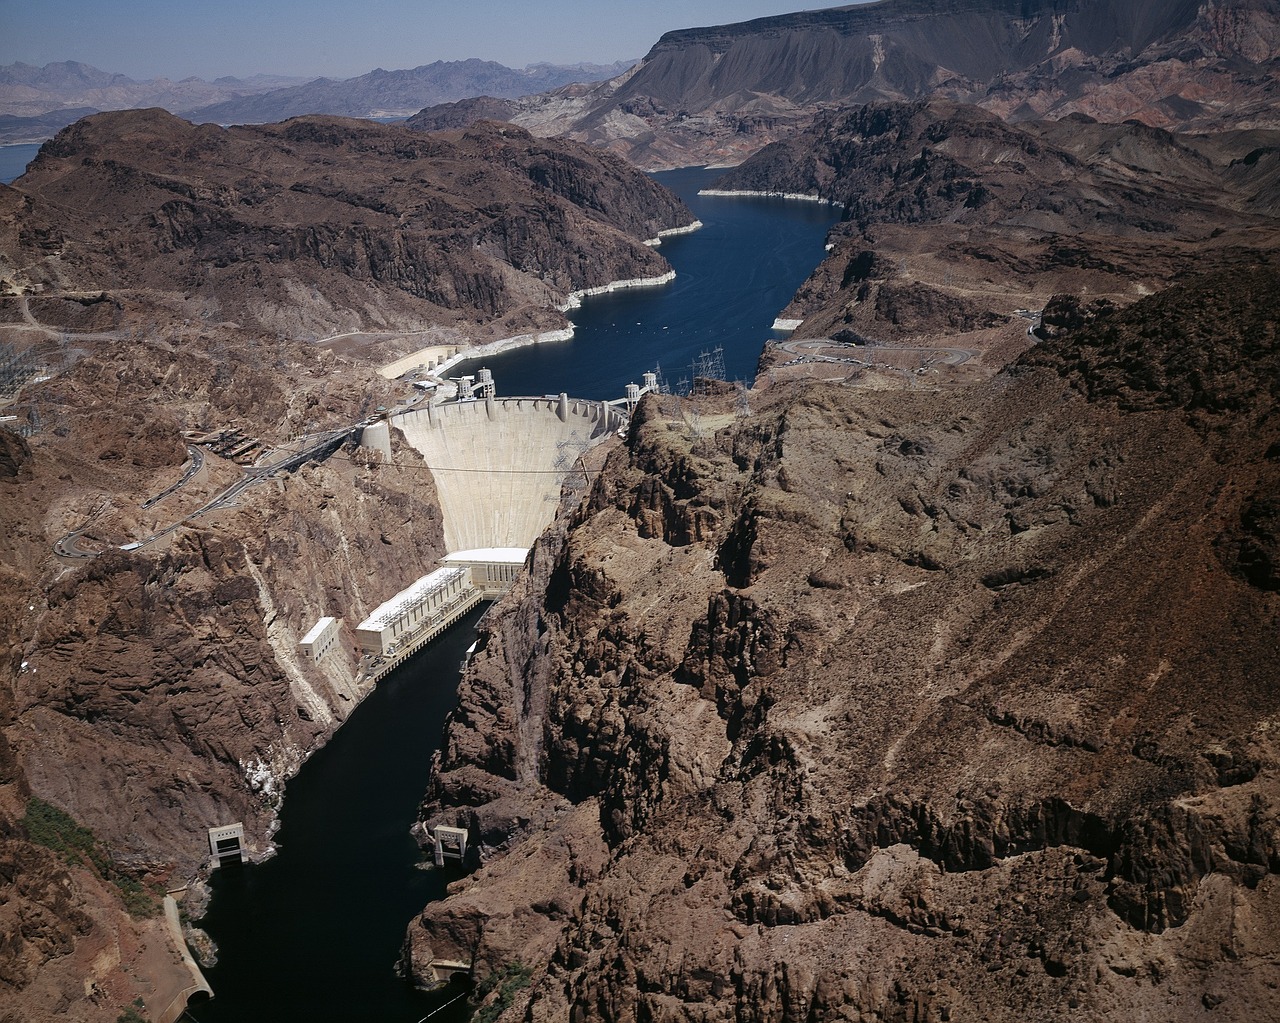 Take a tour of the Hoover Dam